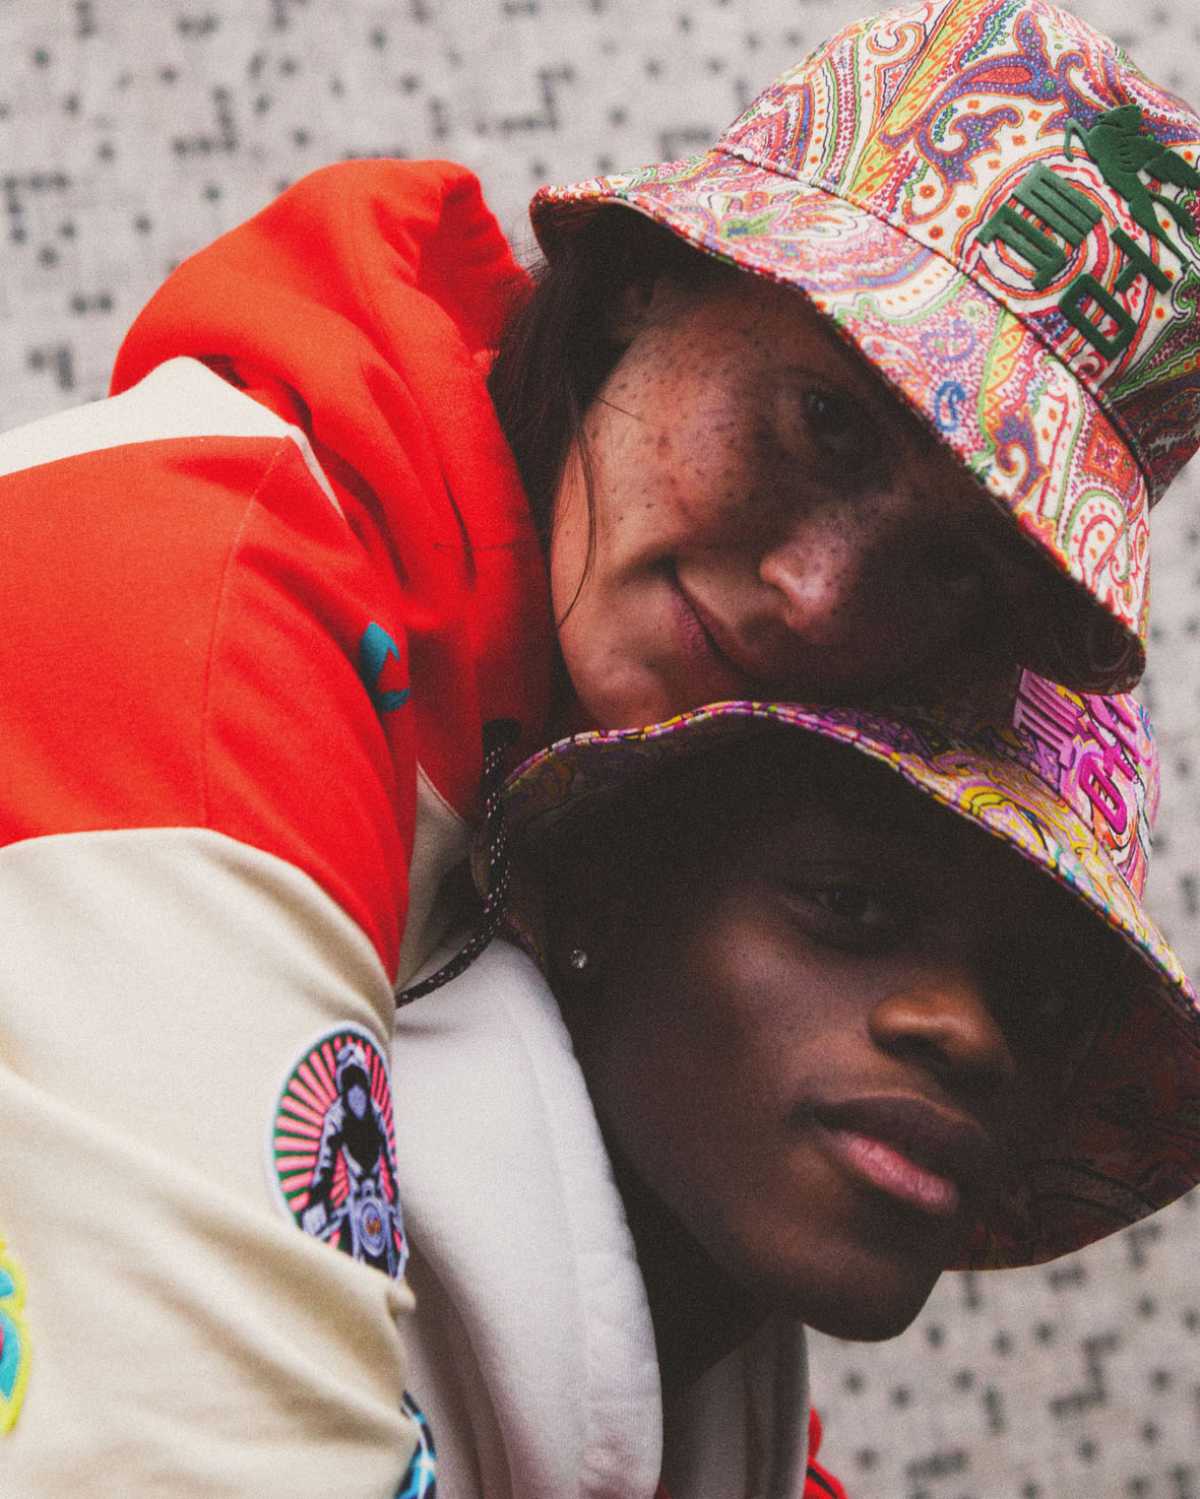 Etro Celebrates Valentine’s Day With The New “Love Hats” Capsule Collection